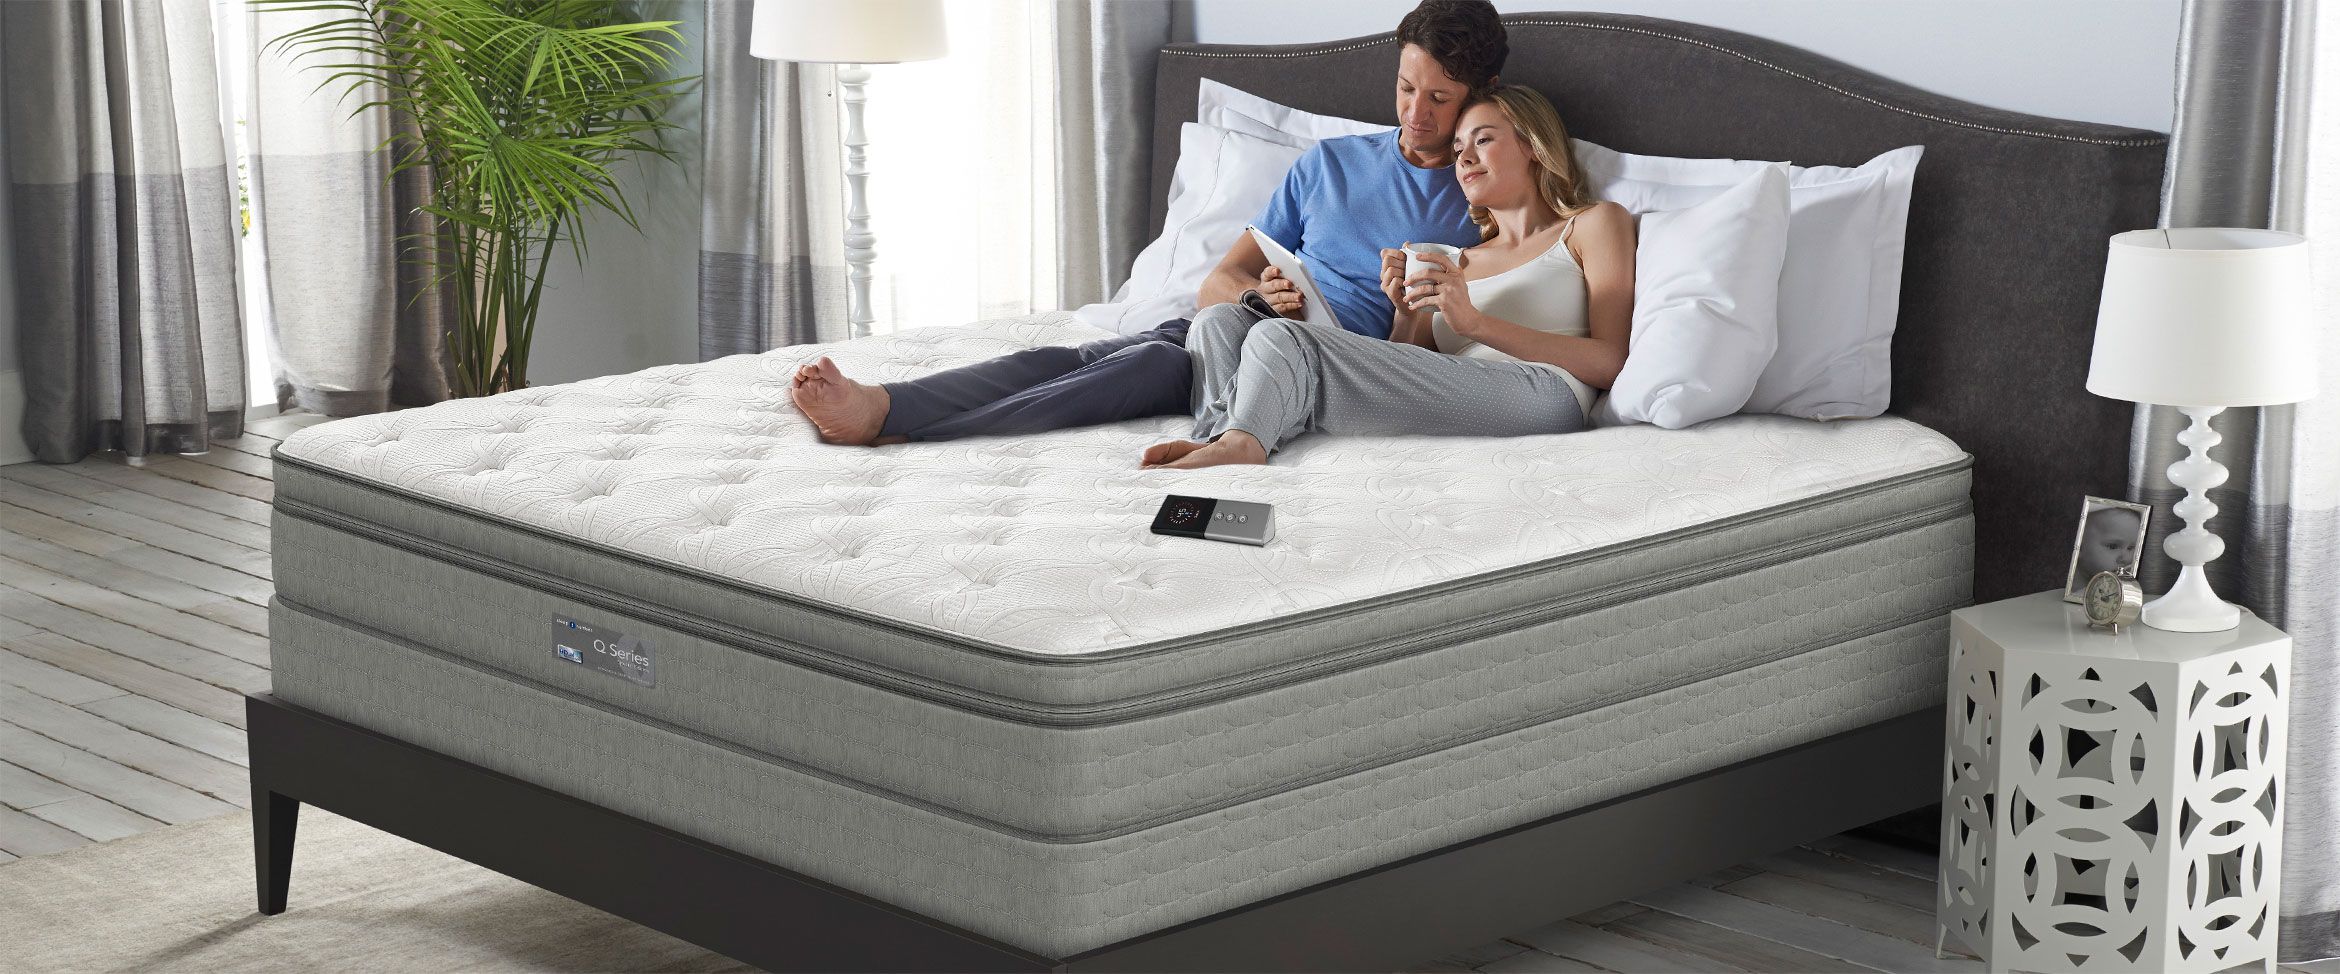 qvc beds and mattresses